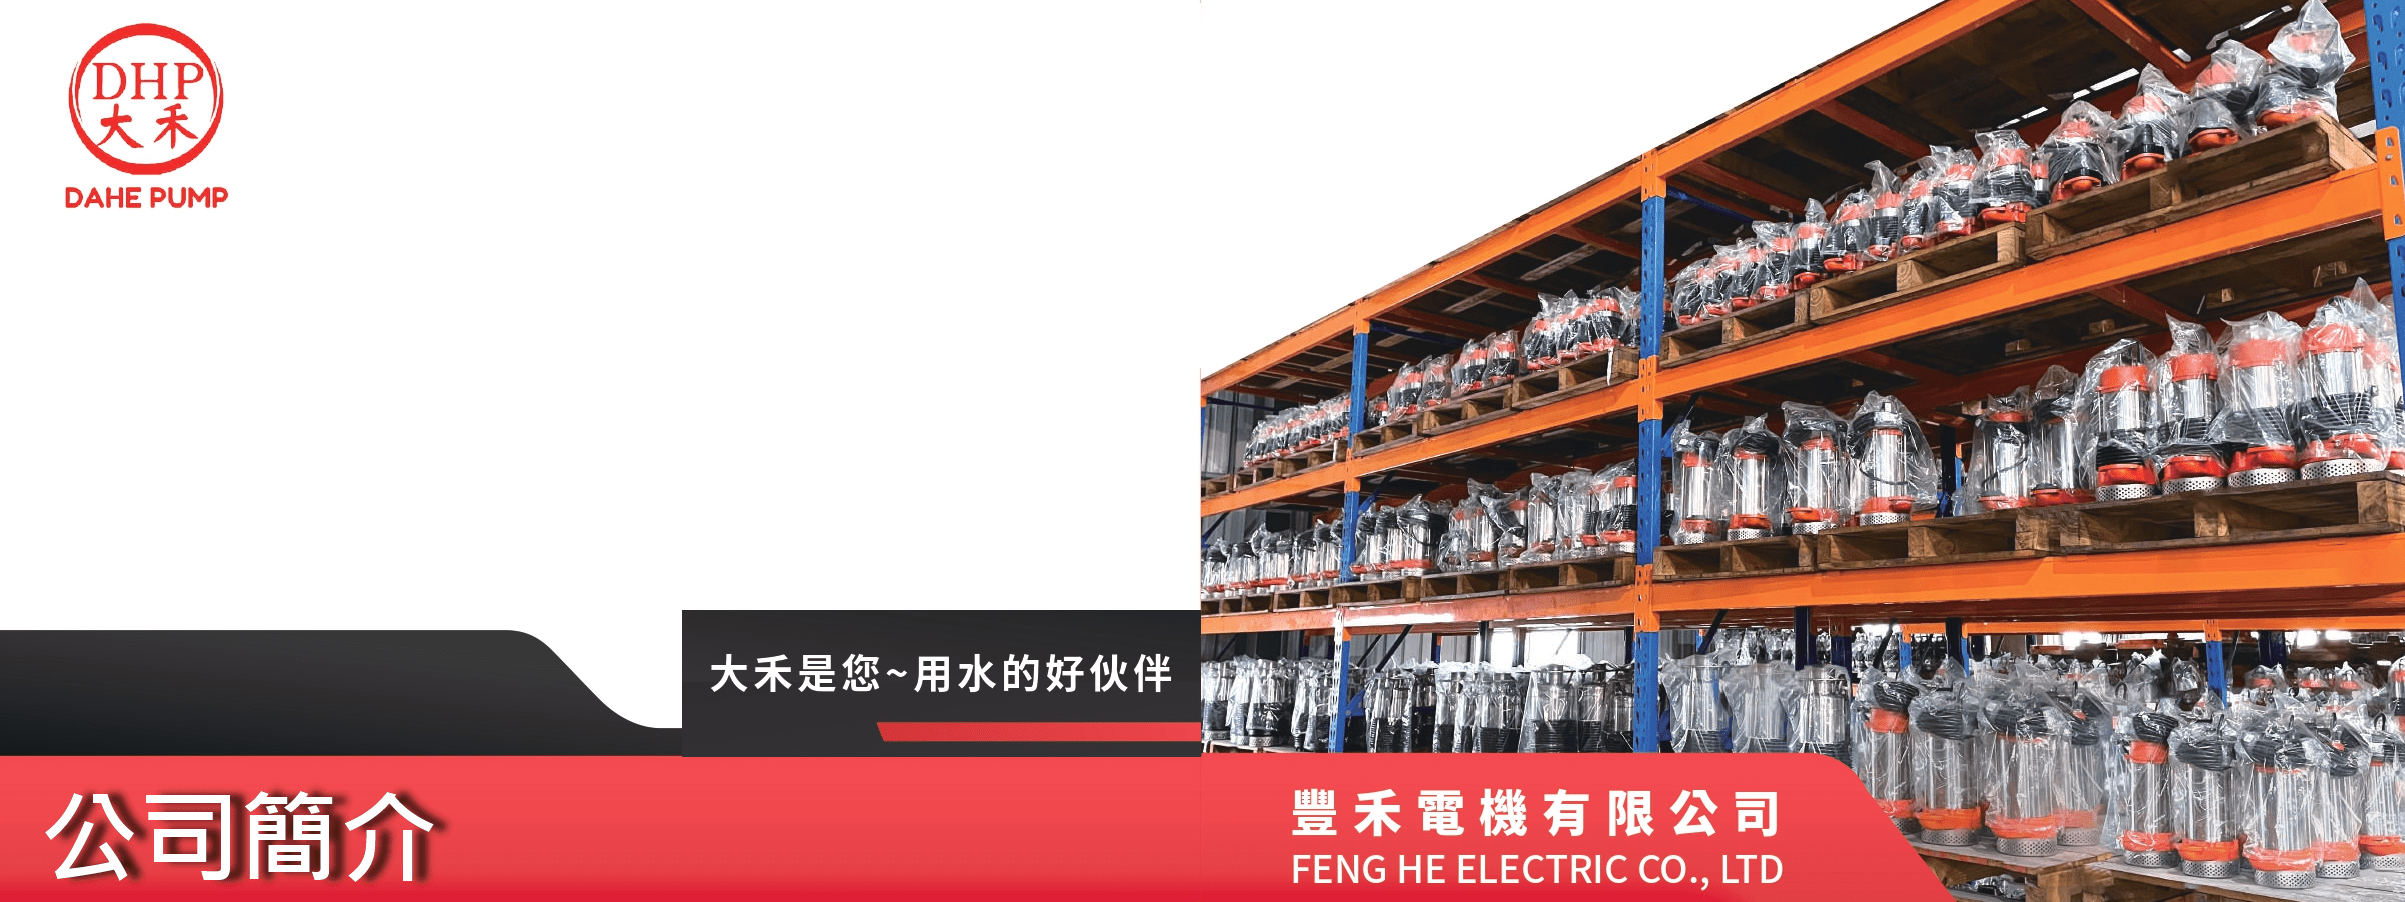 FENG HE ELECTRIC CO.,LTD.的About Us Banner pic